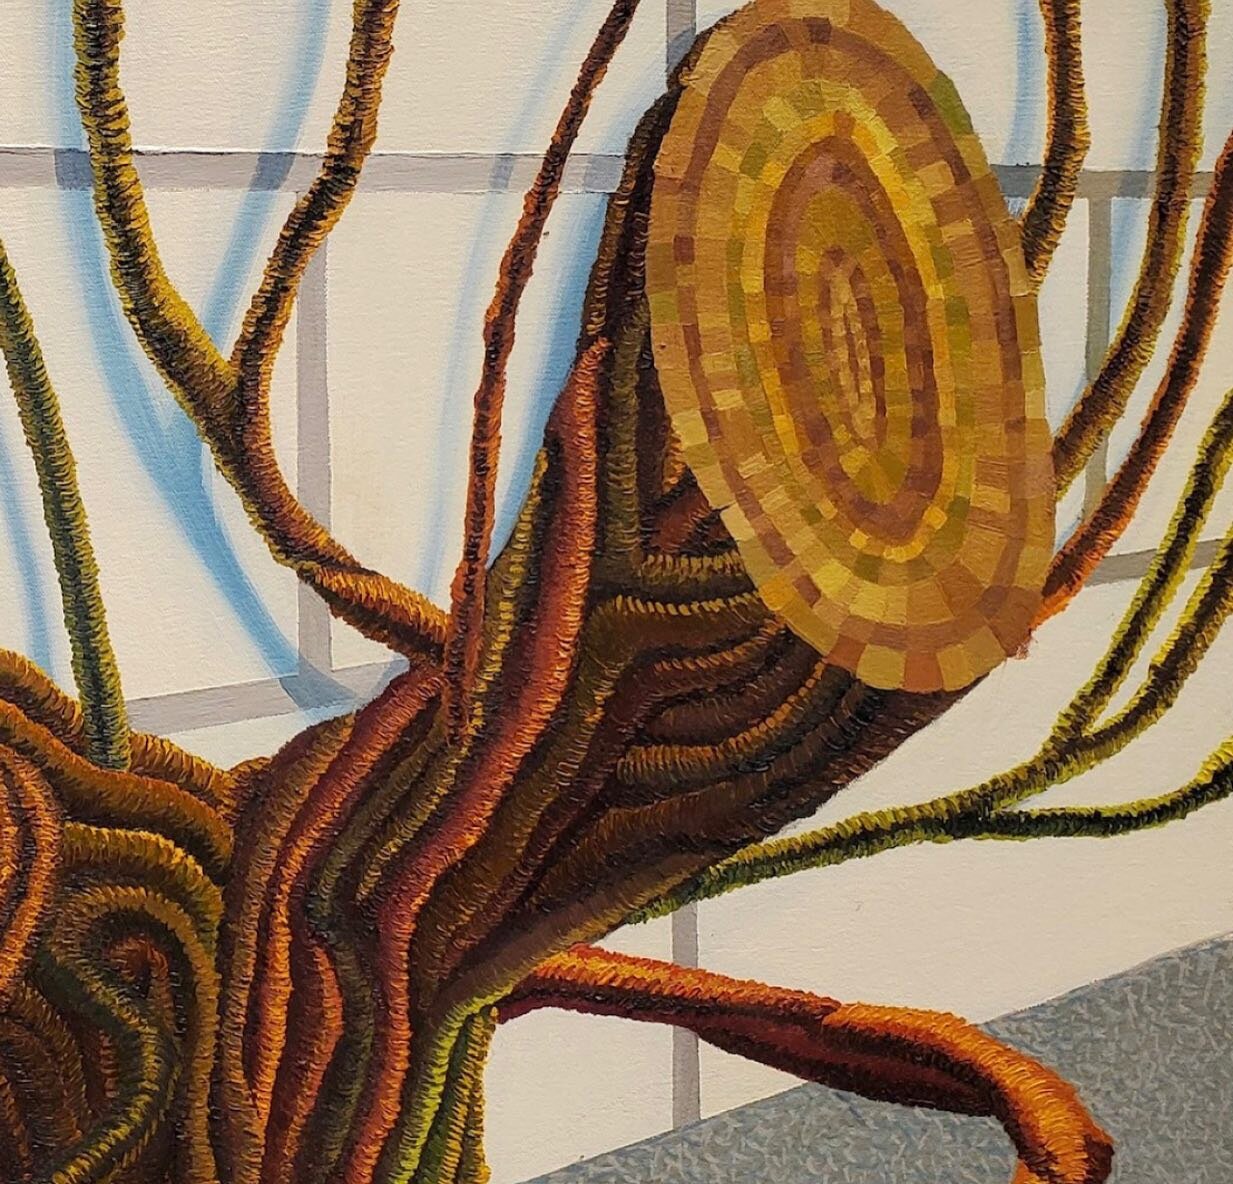 Lovely details of the textured, intricate work of @sallyjerome! 
Come view these works in person during gallery hours.
#partsofpaintings 

&ldquo;Time Machine&rdquo;
Oil on canvas
26 x 32 inches
2022

&ldquo;Descendants&rdquo;
Oil on canvas
24 x 32 i